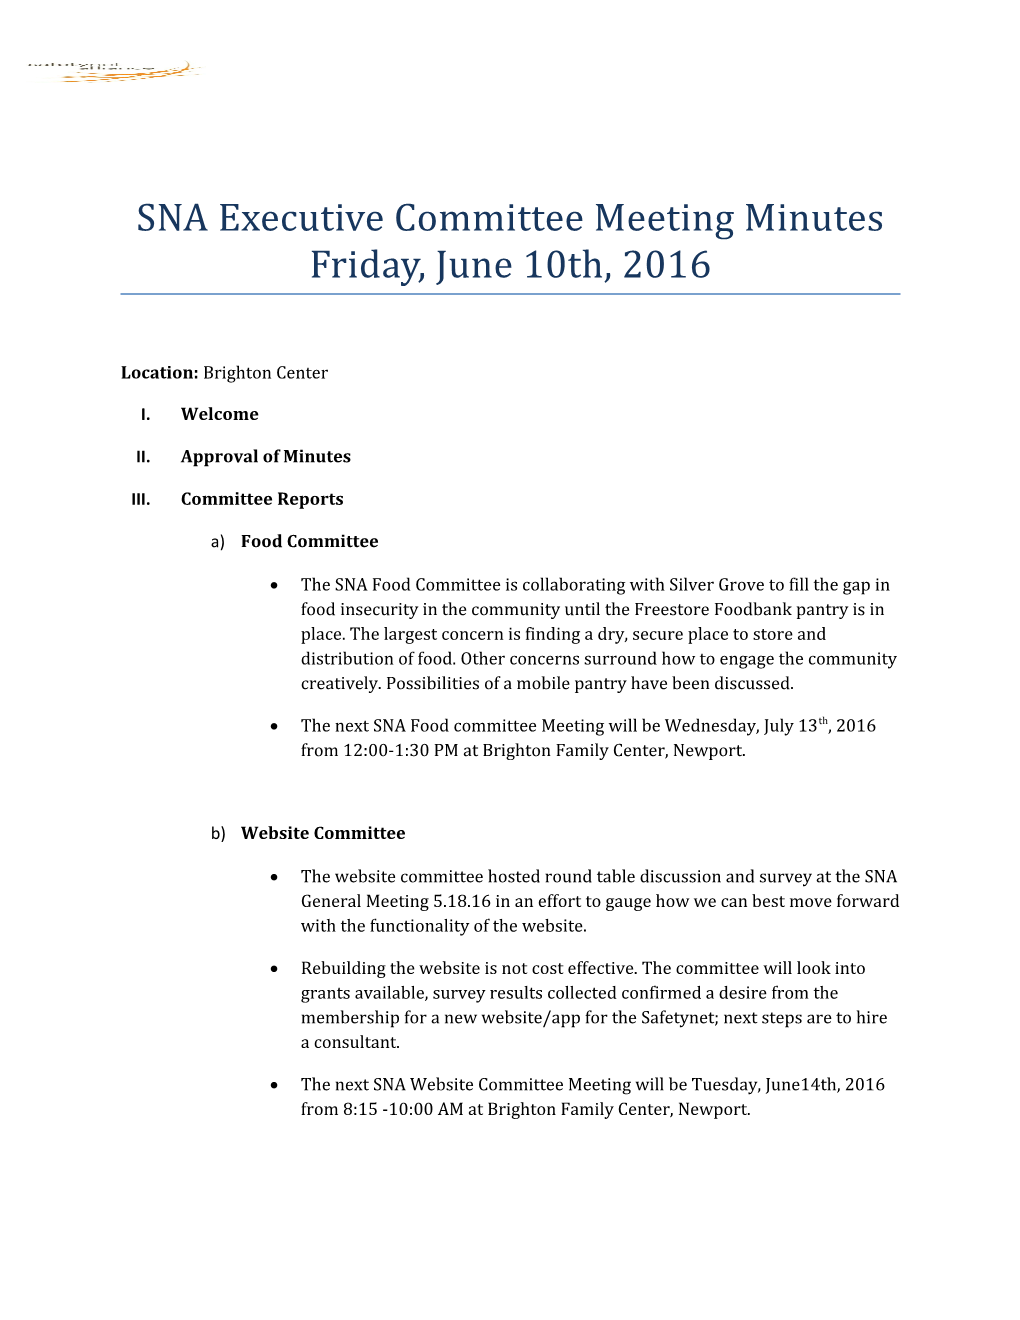 SNA Executive Committee Meeting Minutes Friday, June 10Th, 2016